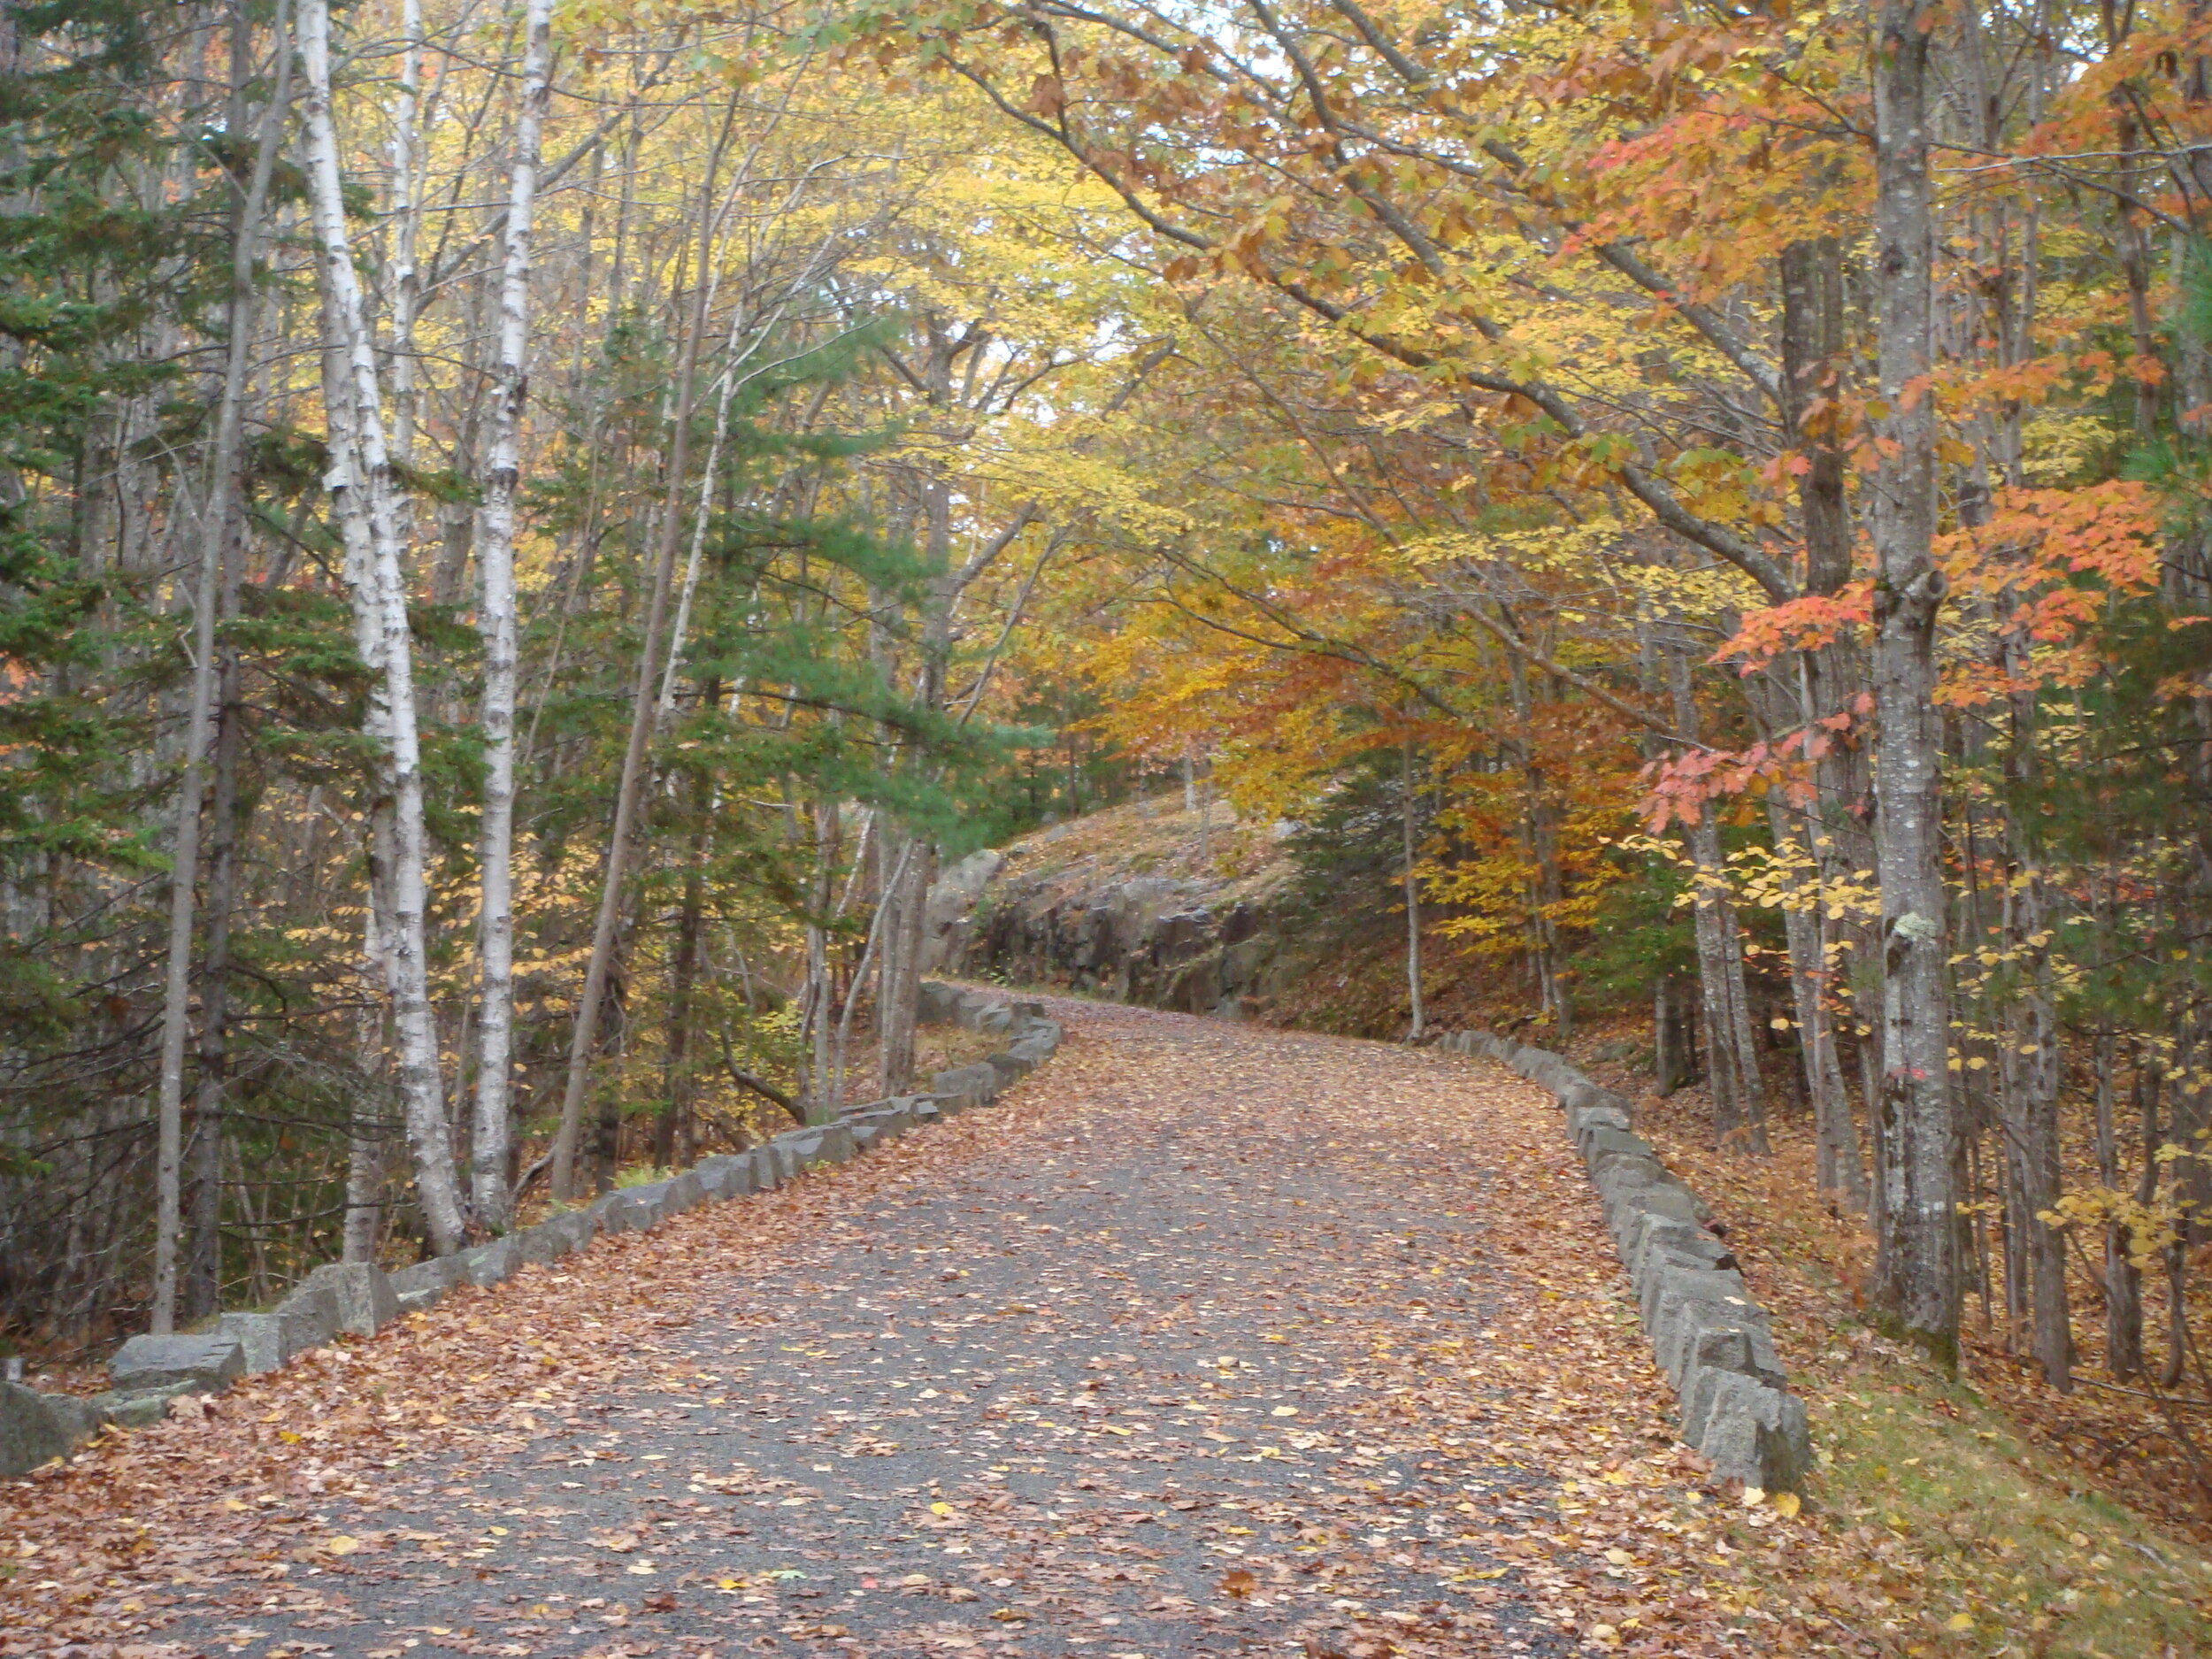 Fall is a lovely time to walk the iconic carriage roads at Acadia National Park.